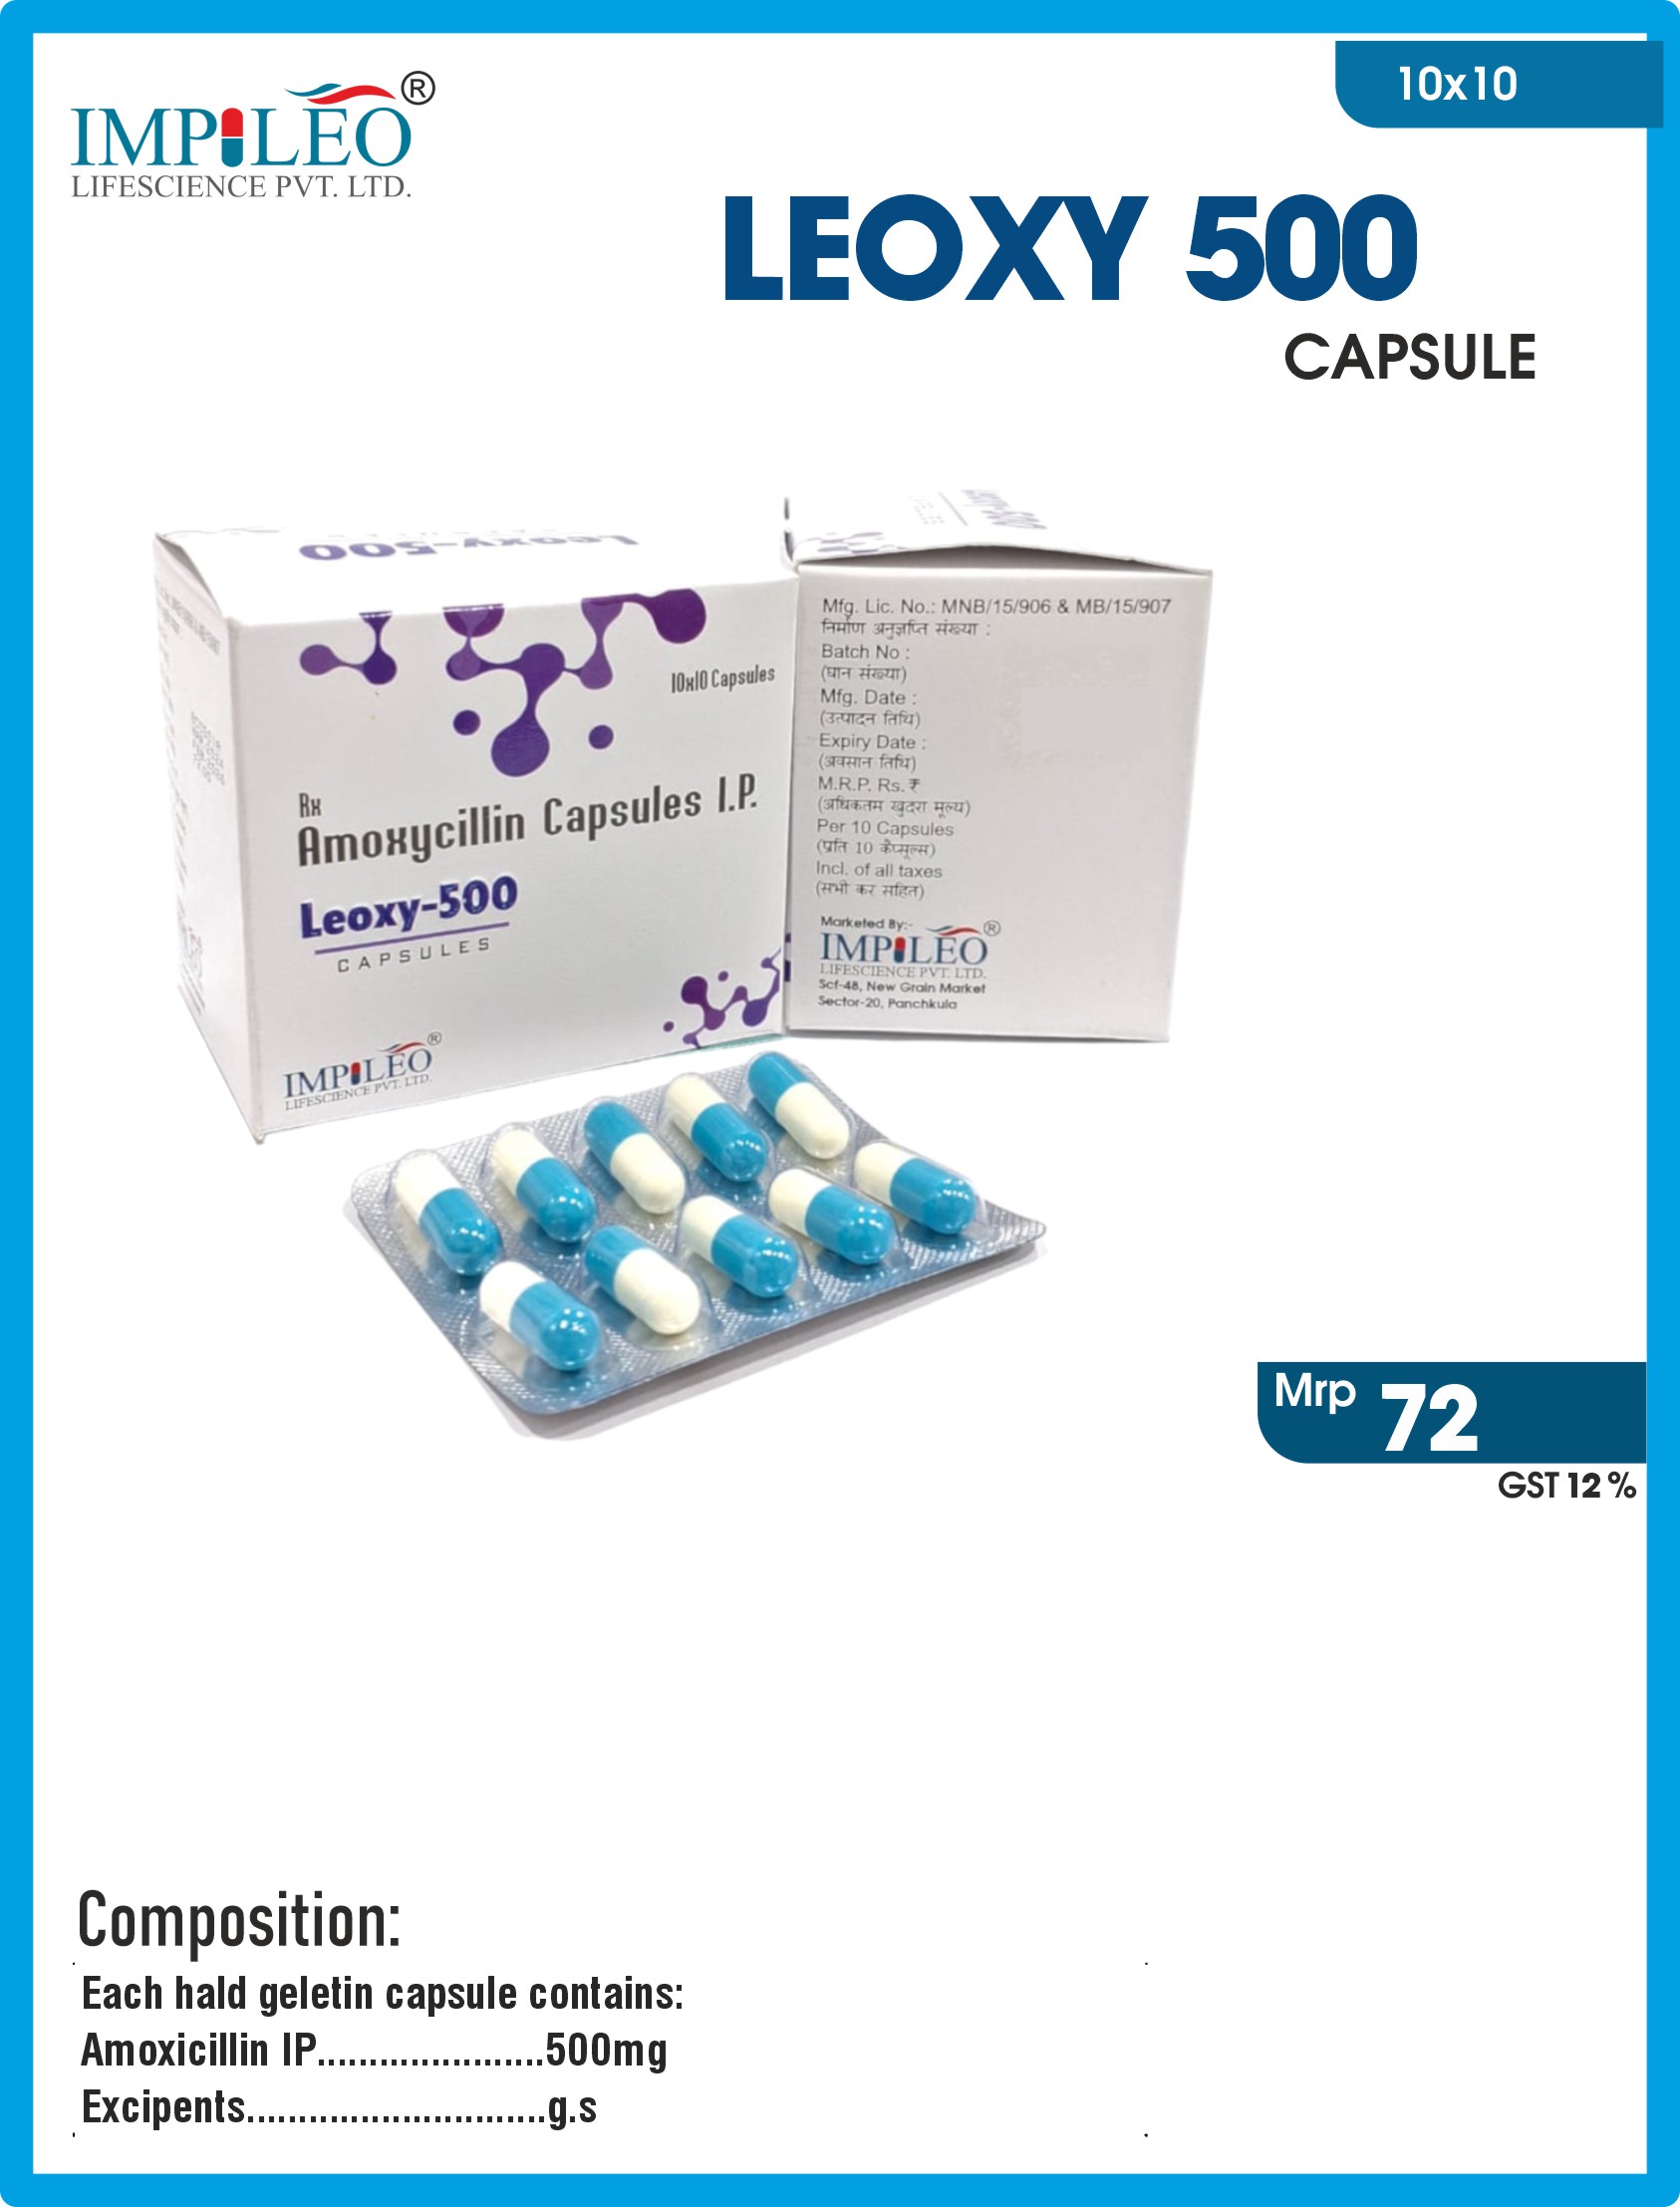 Elevate Your Business : Opt for Third Party Manufacturing in India for LEOXY 500 Capsules